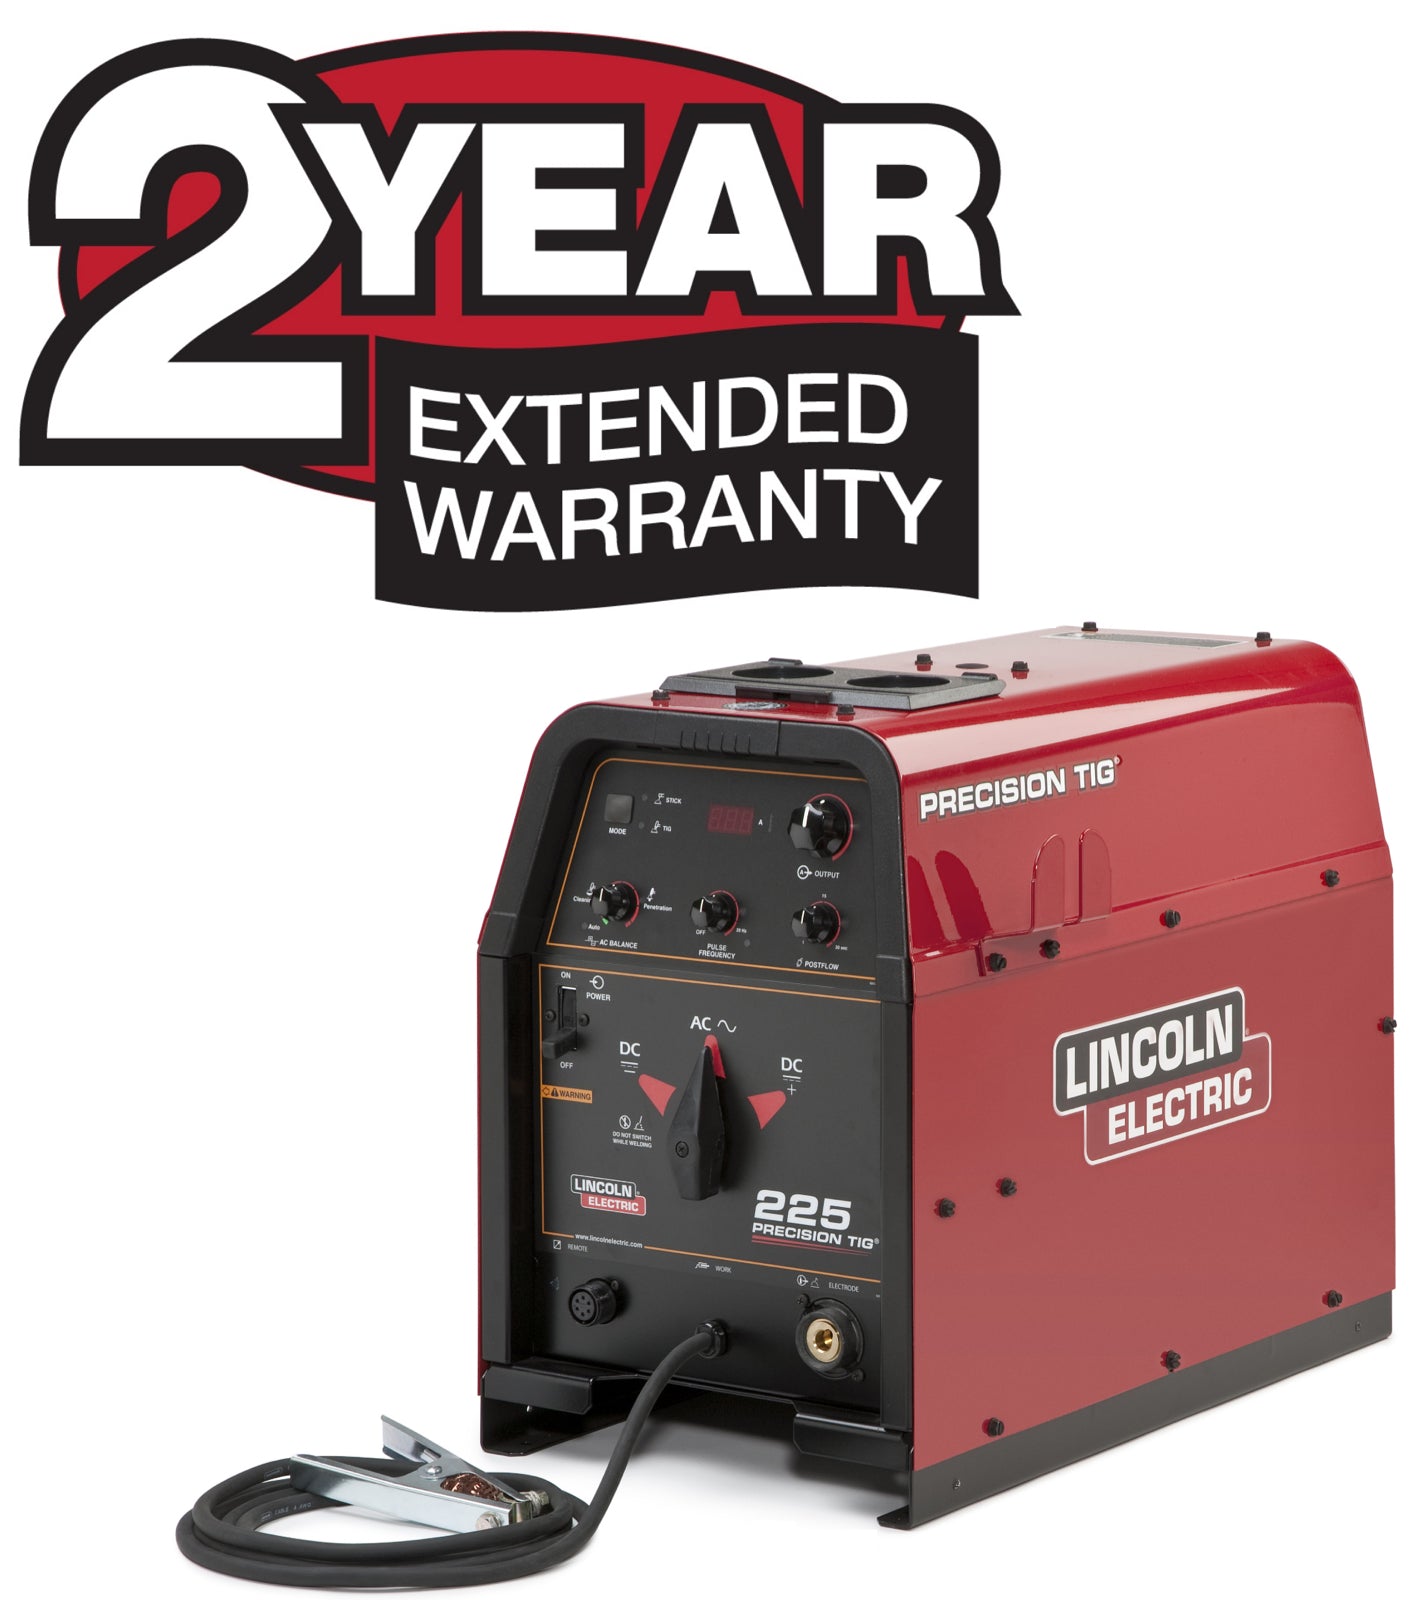 Lincoln 2-Year Extended Warranty - Precision TIG 225 X2533